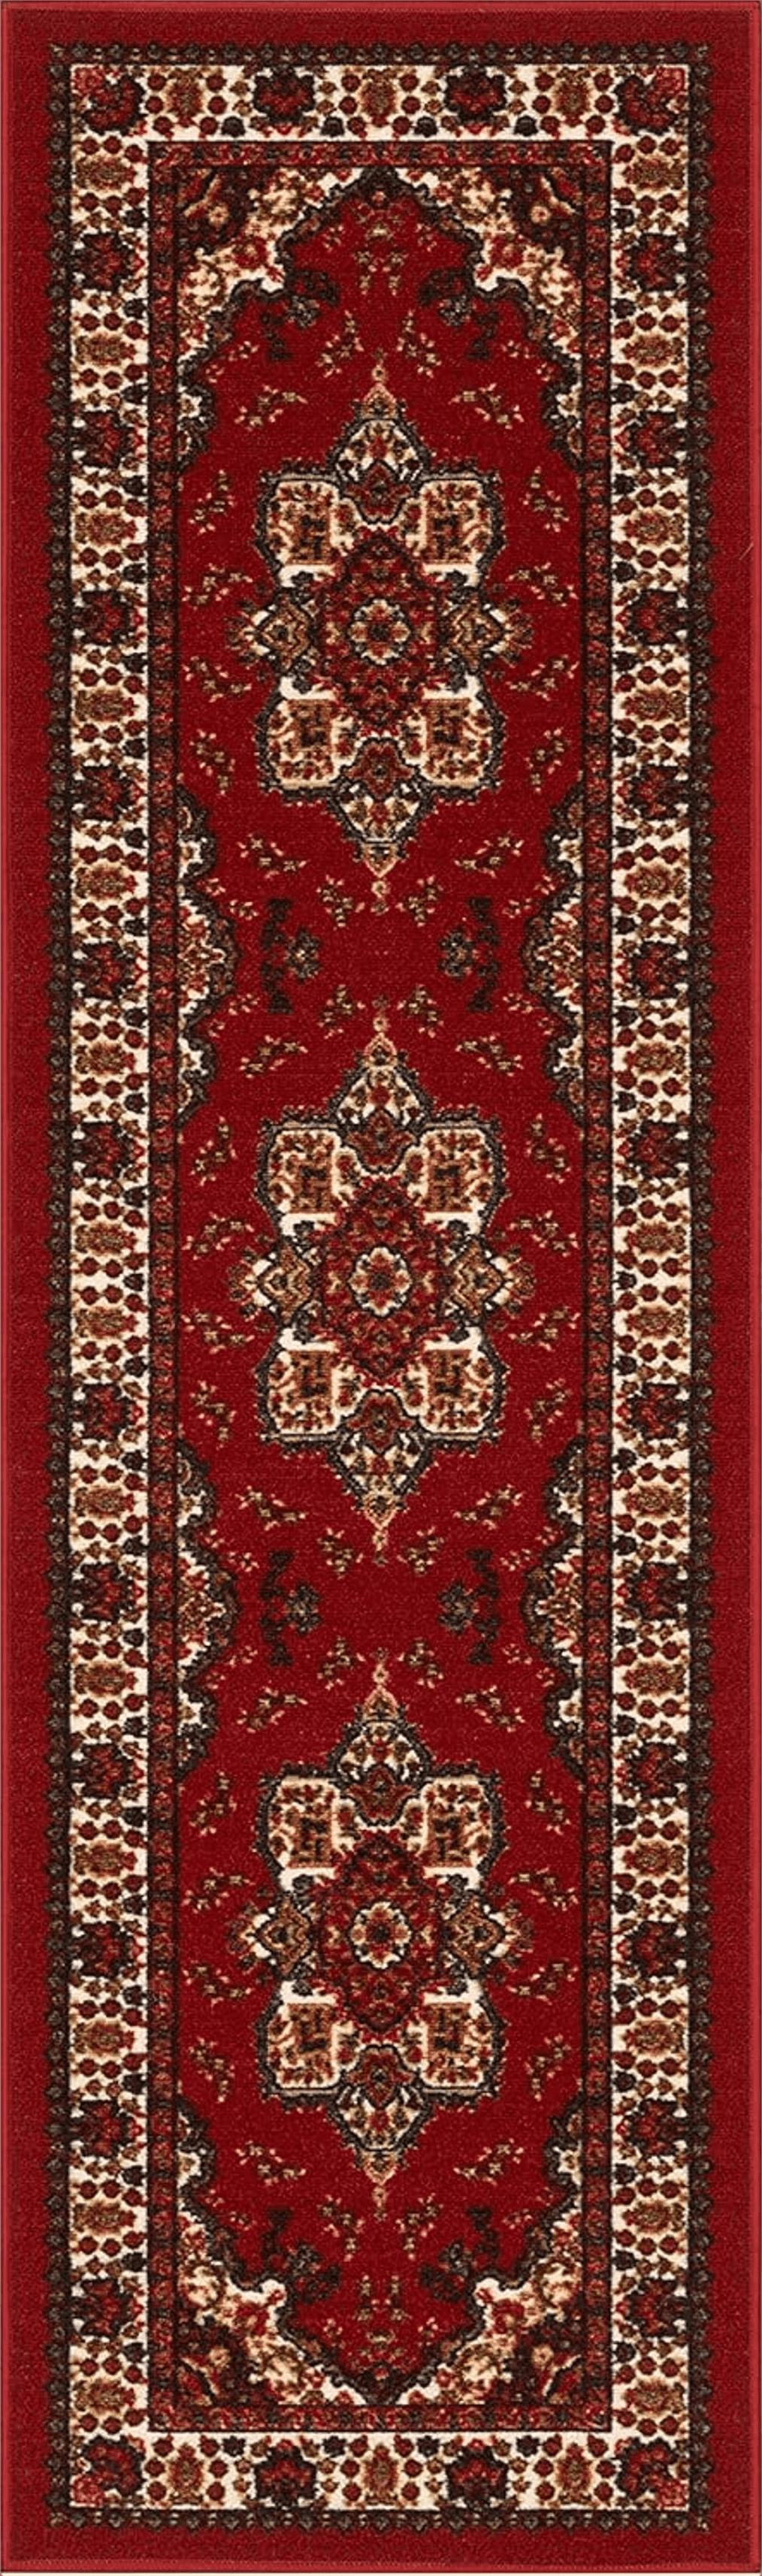 Disney Antep Rugs Alfombras Oriental Traditional 2x7 Non-Skid (Non-Slip) Low Profile Pile Rubber Backing Indoor Area Runner Rugs (Maroon, 2' x 7')